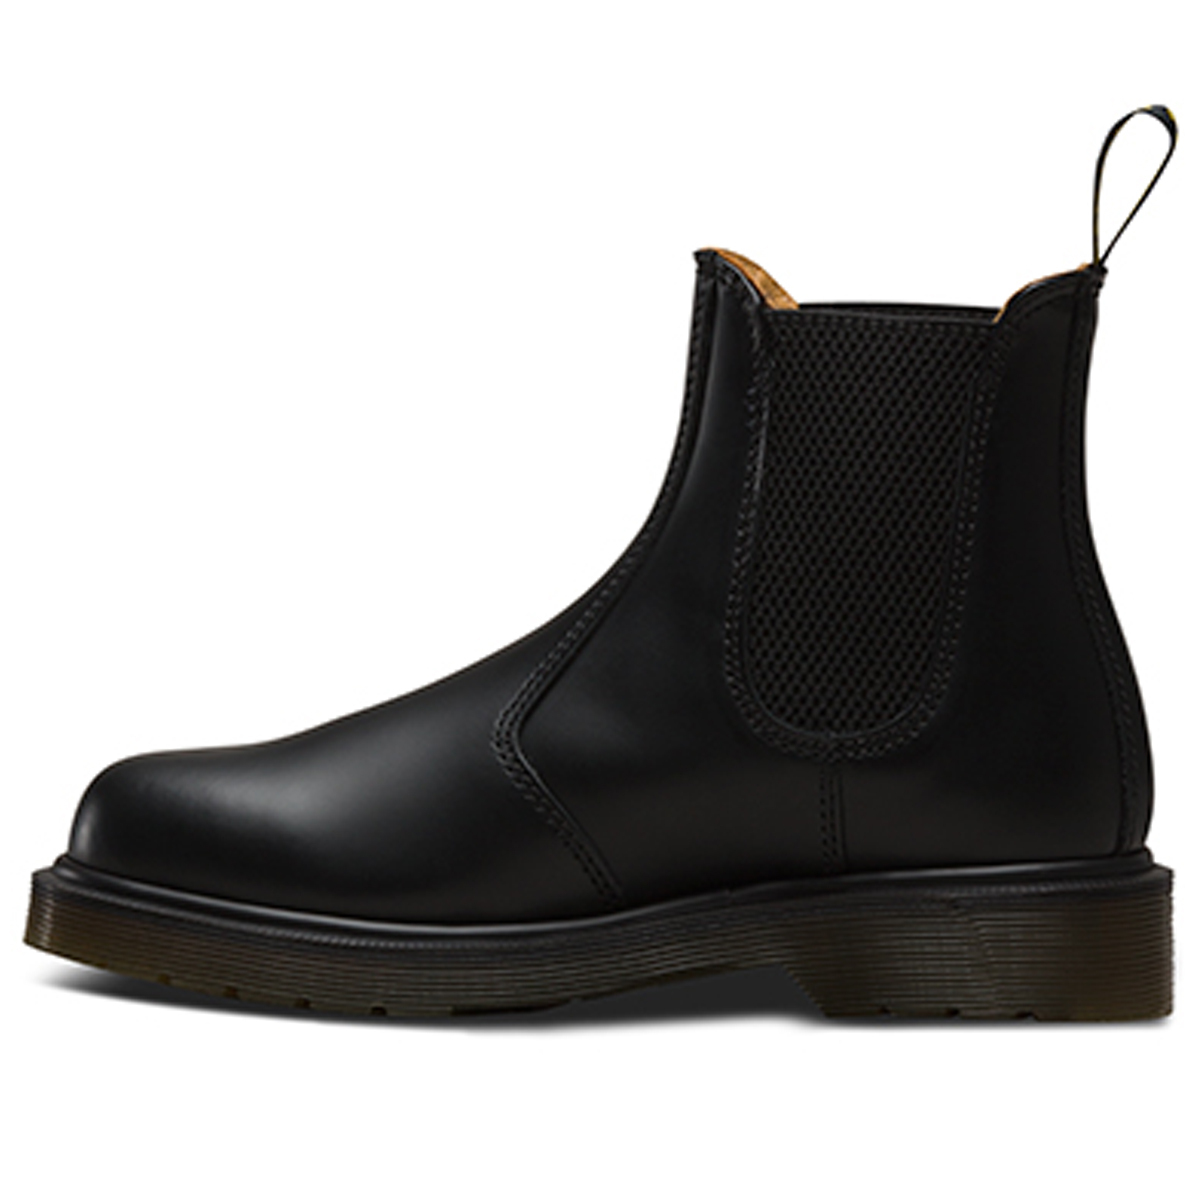 2976 chelsea boot black smooth